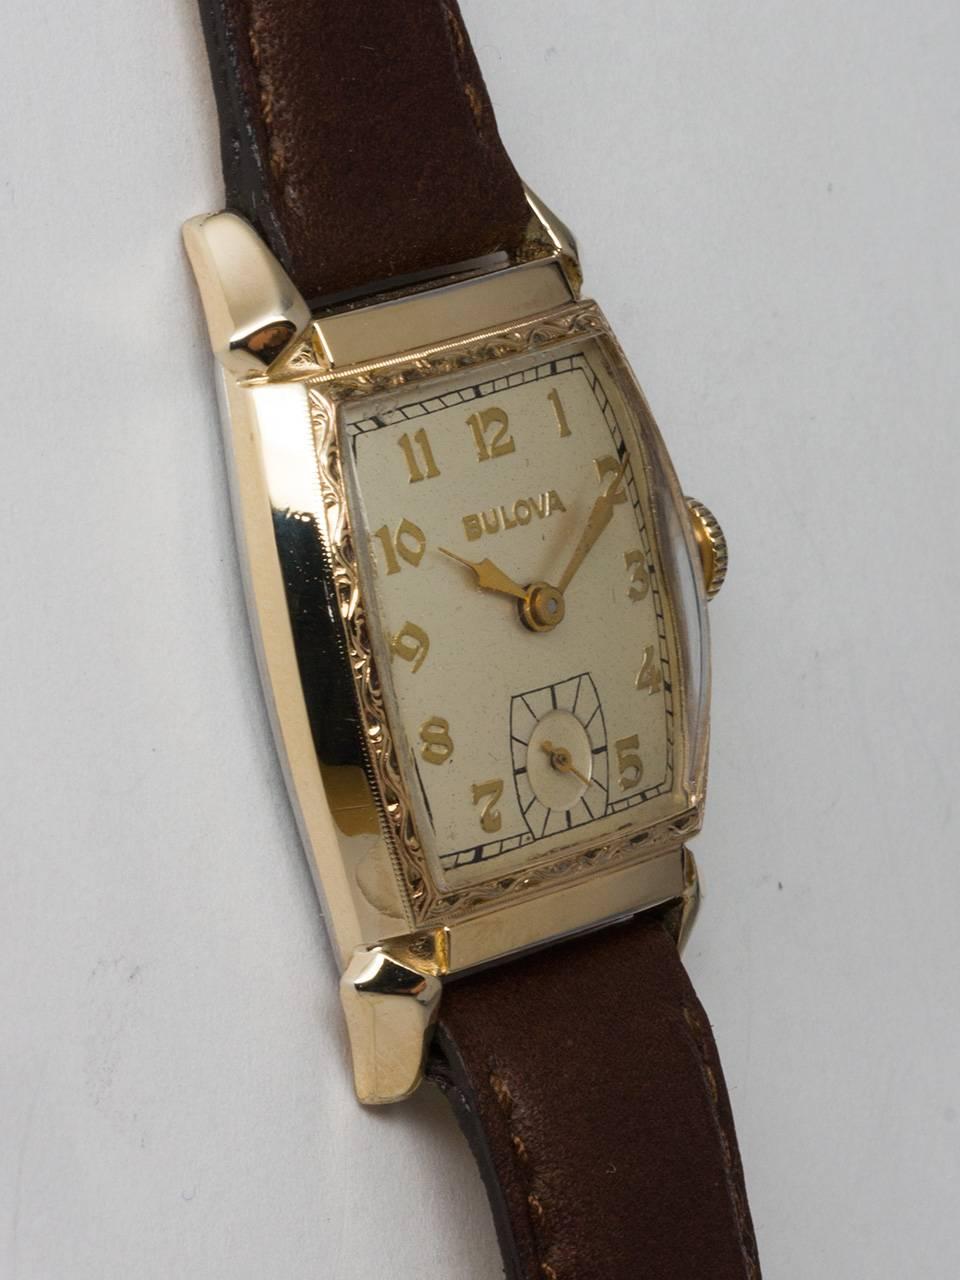 Bulova Yellow Gold Filled Dress Model circa 1940s. Small vintage man’s tonneau shaped case measuring 26 x 38mm with engraved bezel and singed Bulova crown. Pleasing original matte silver dial with gold raised indexes and gilt spade hands. Powered by